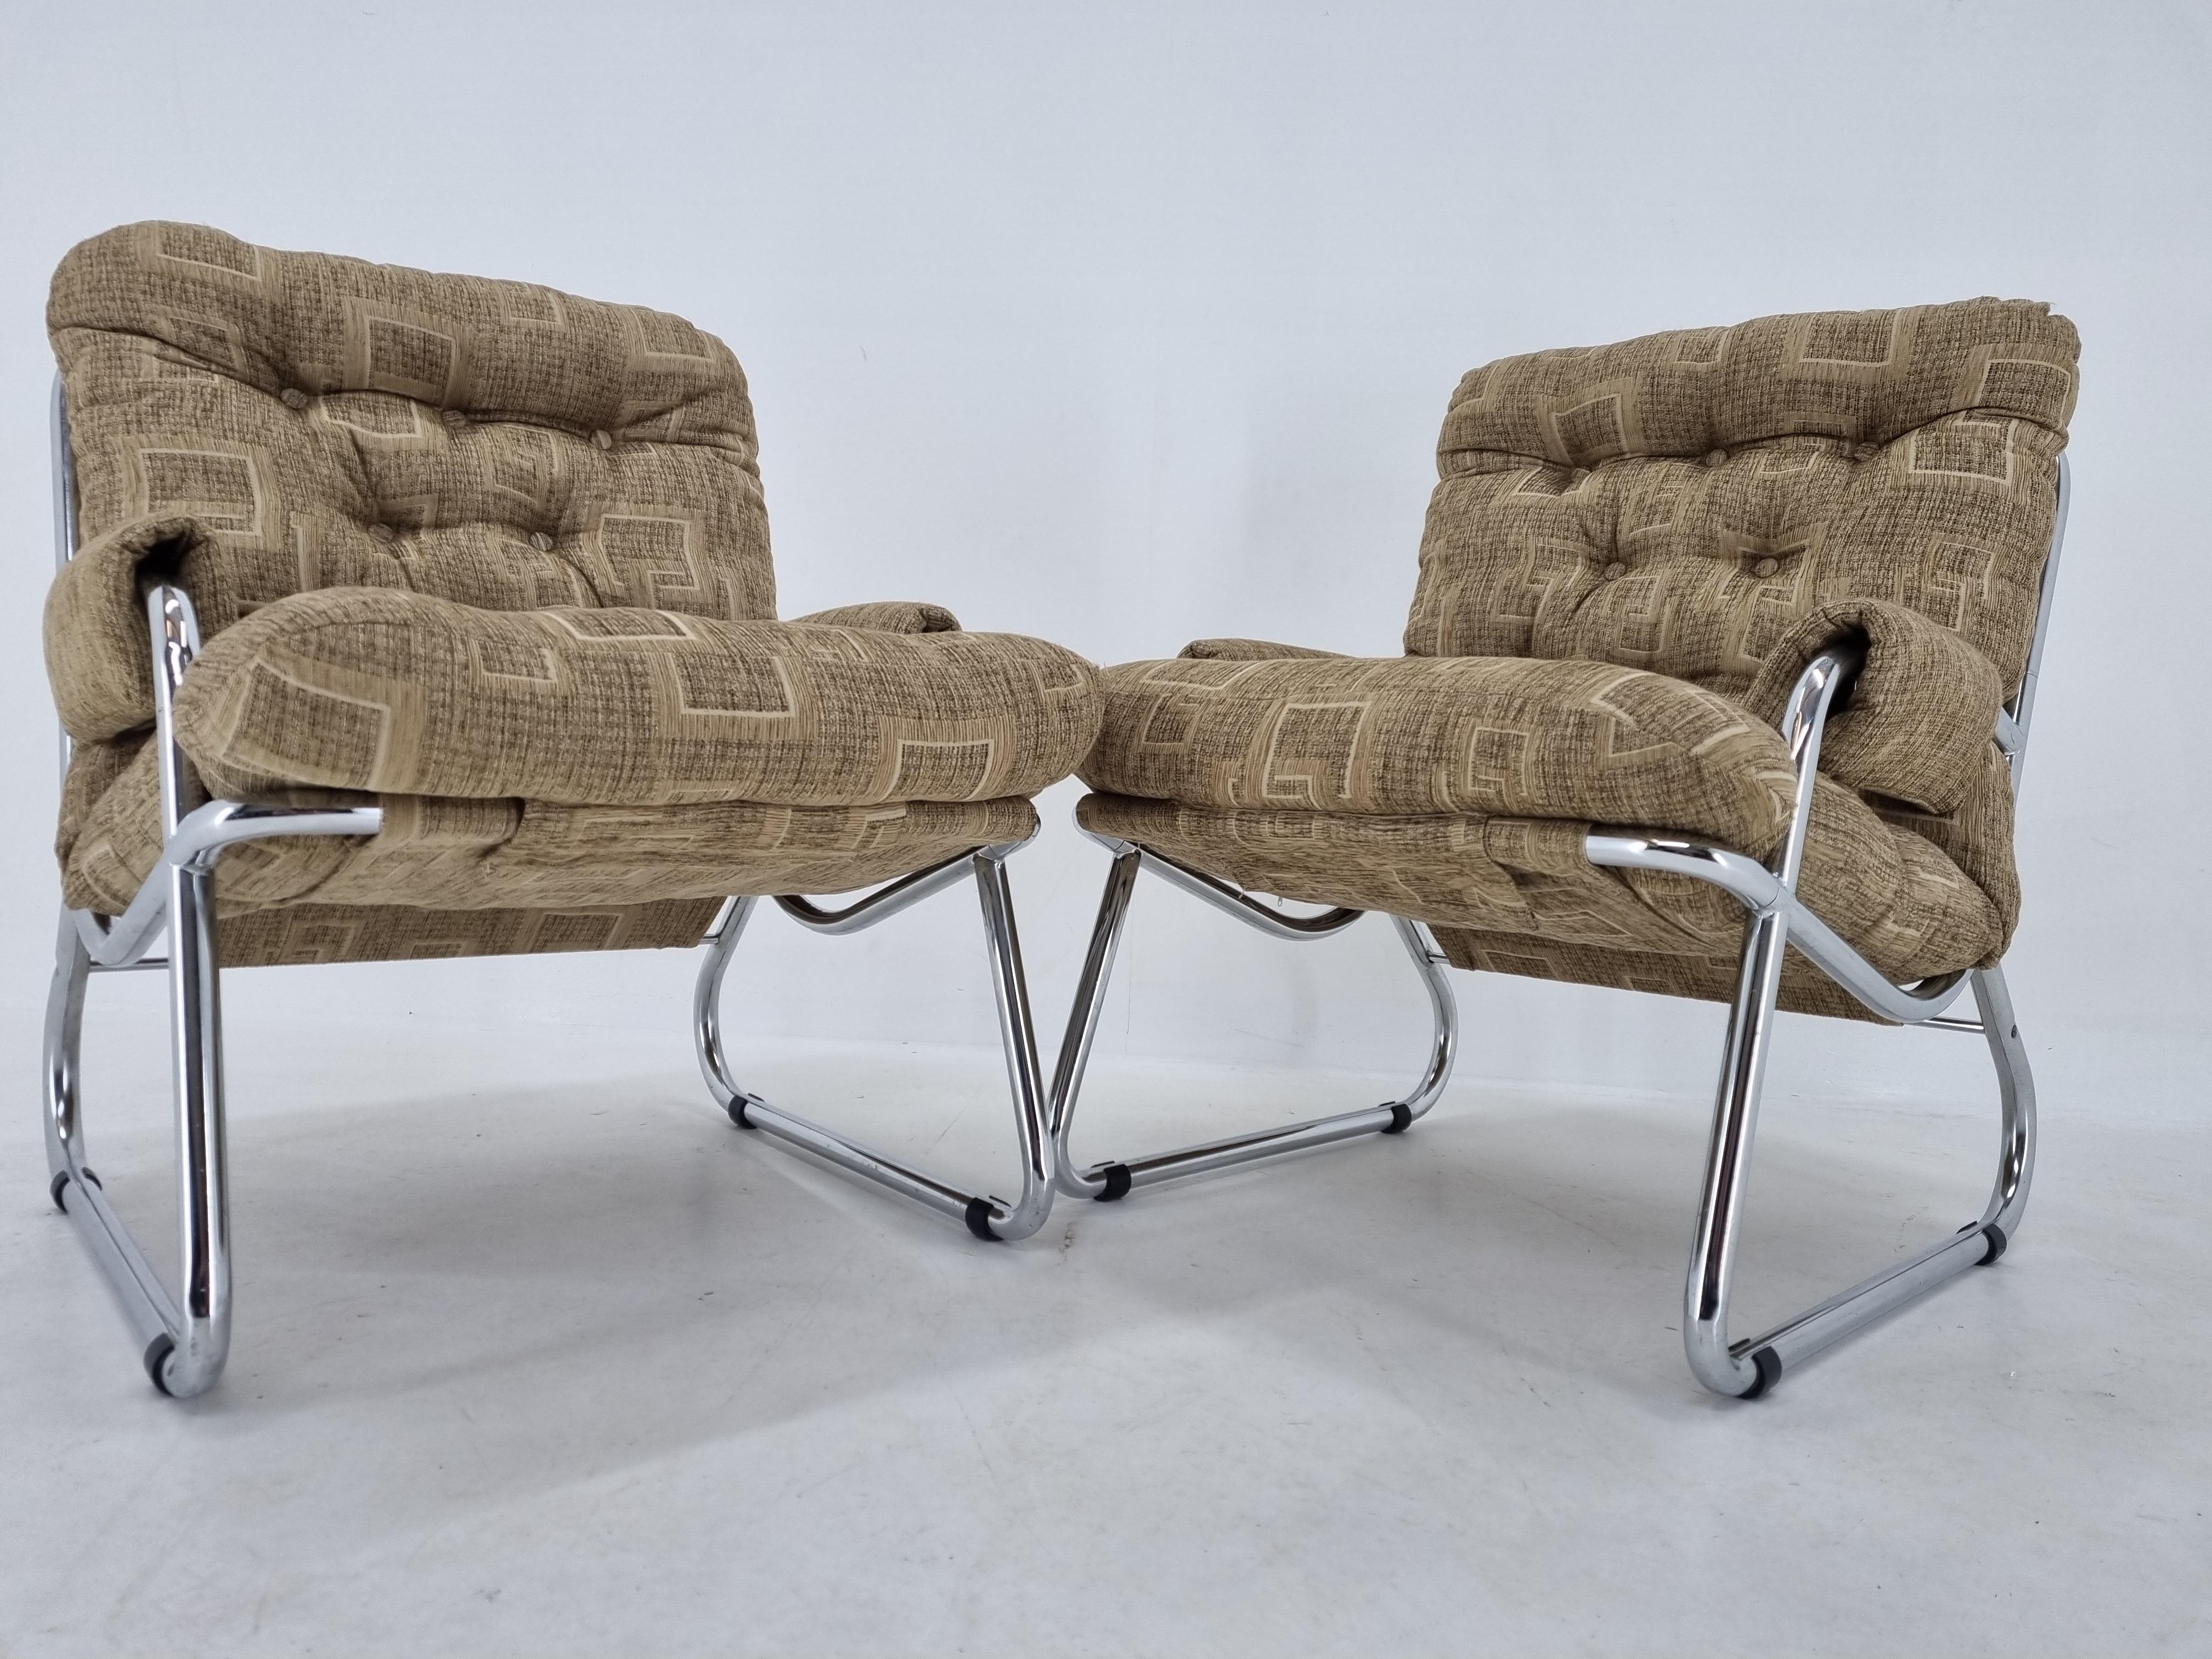 English Pair of Mid-Century Armchairs, Peter Hoyte, 1970s